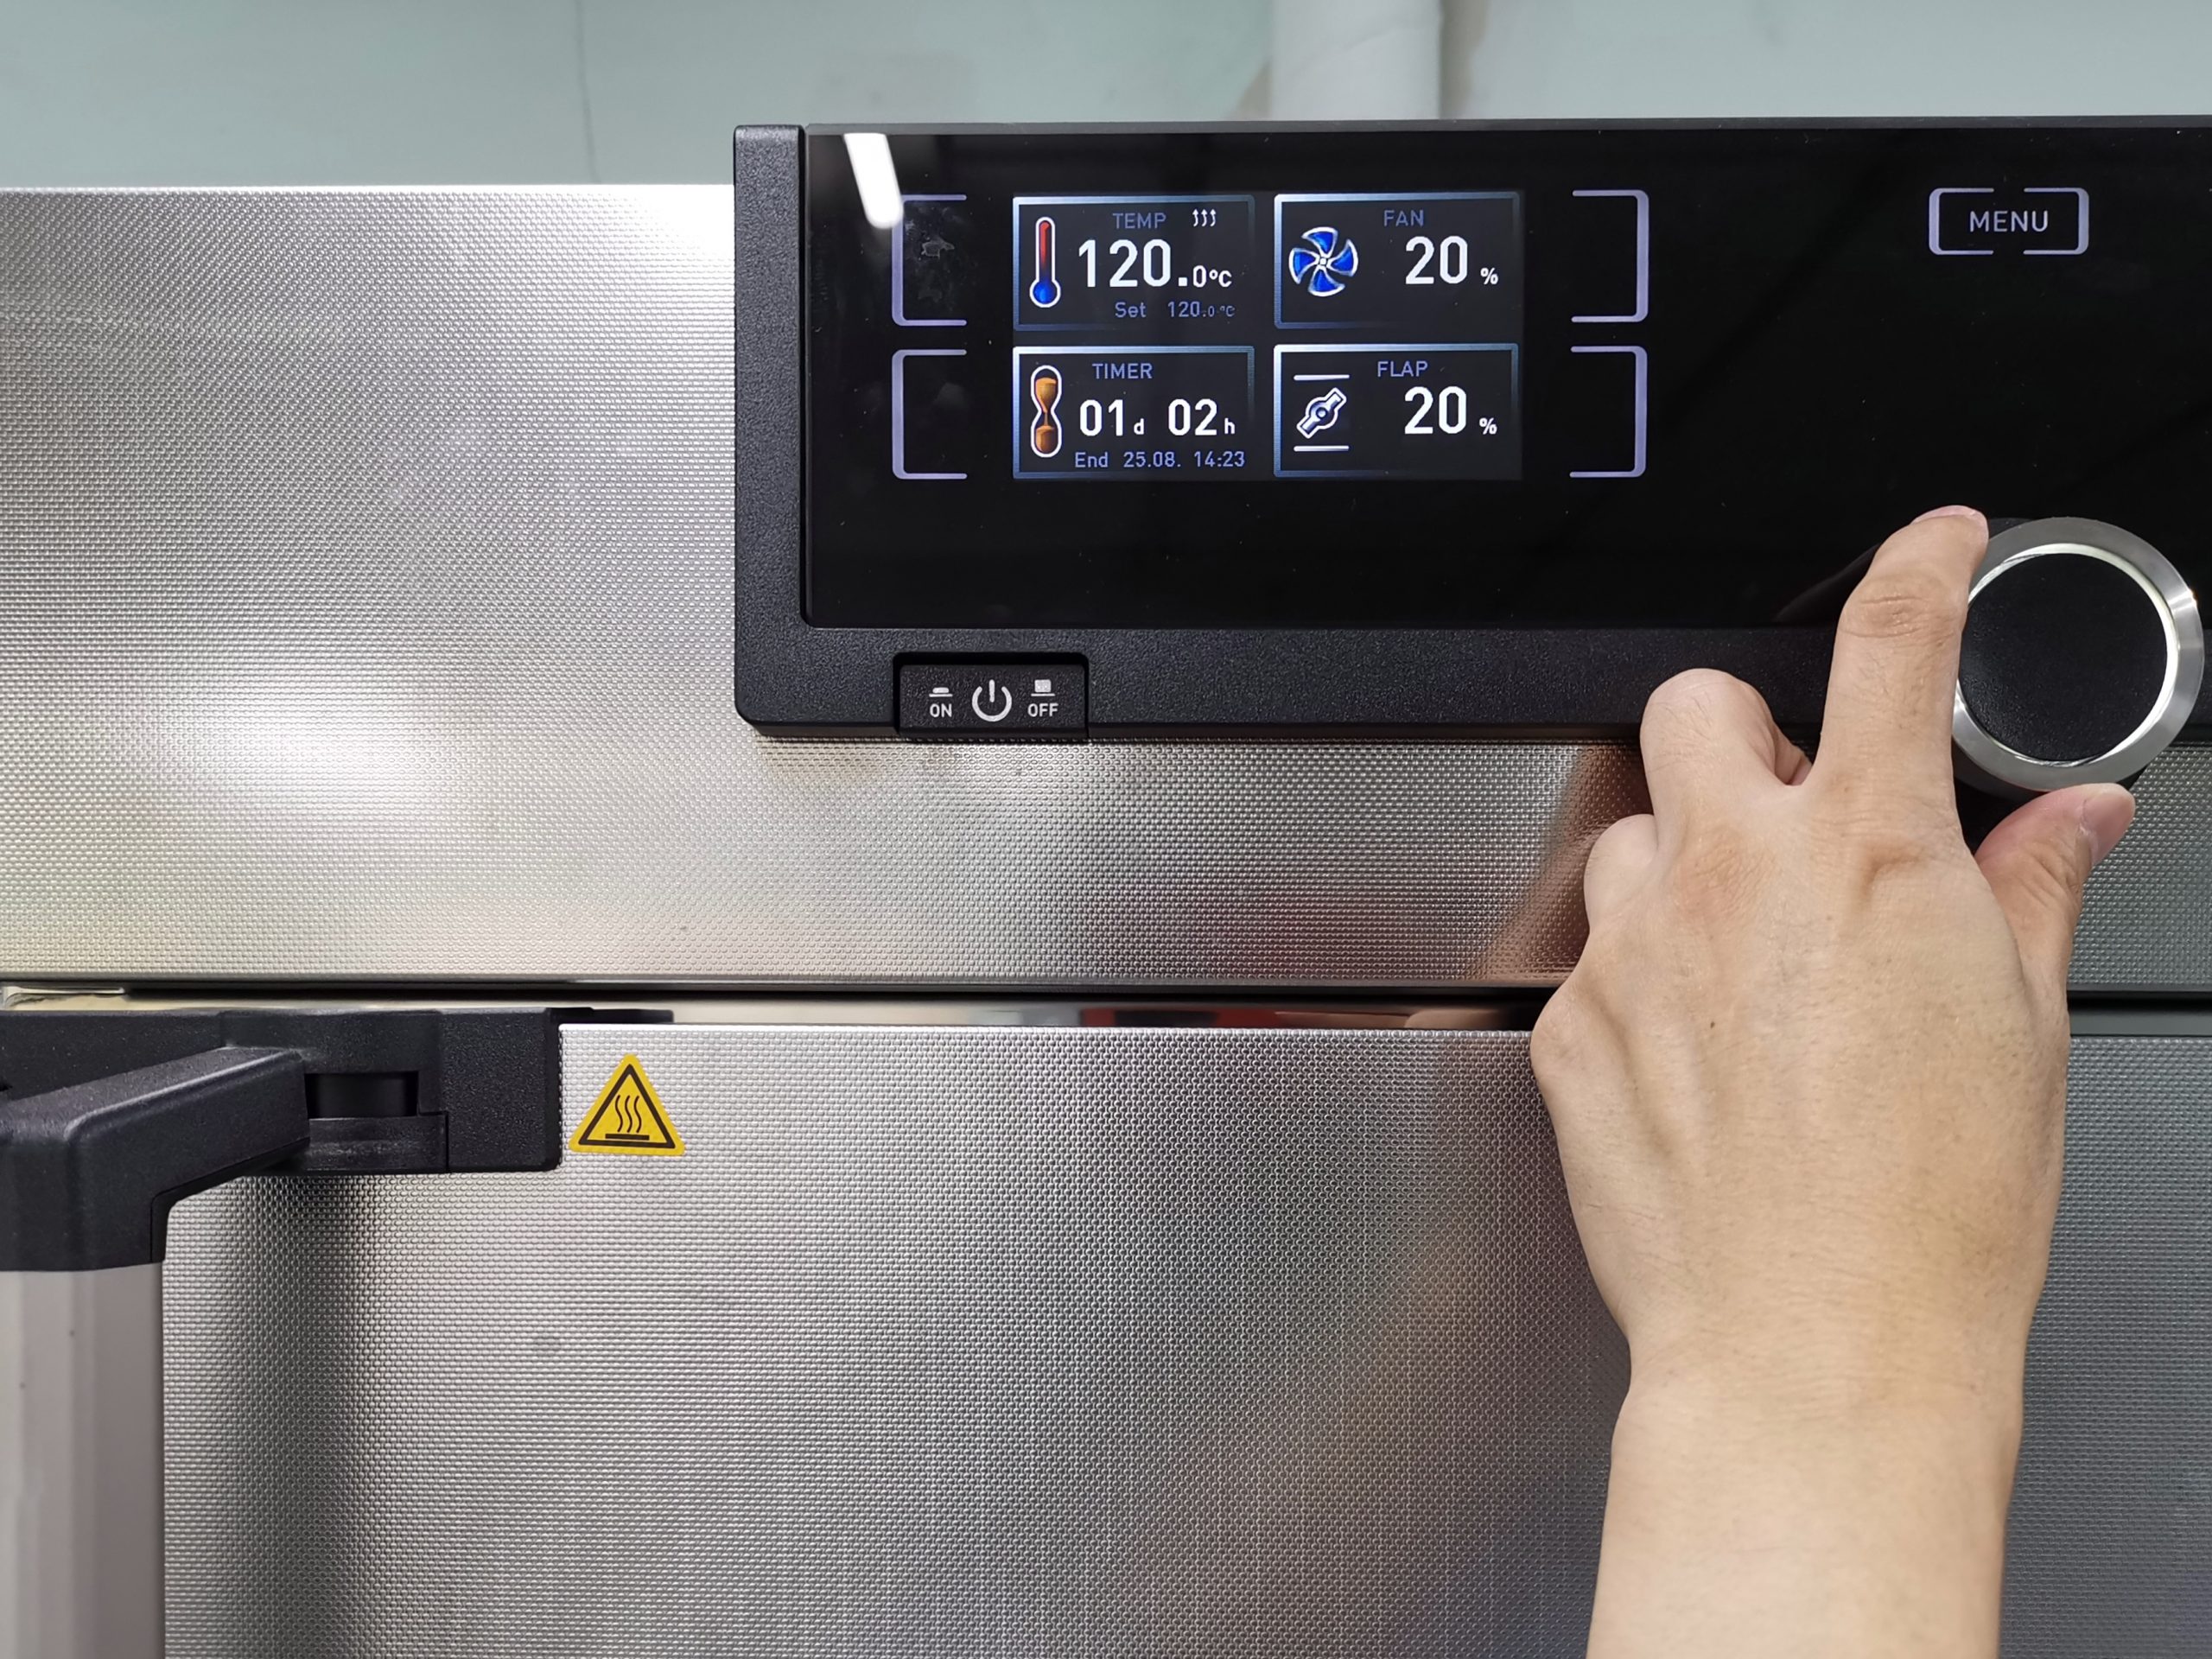 Oven Calibration – Why it's important.